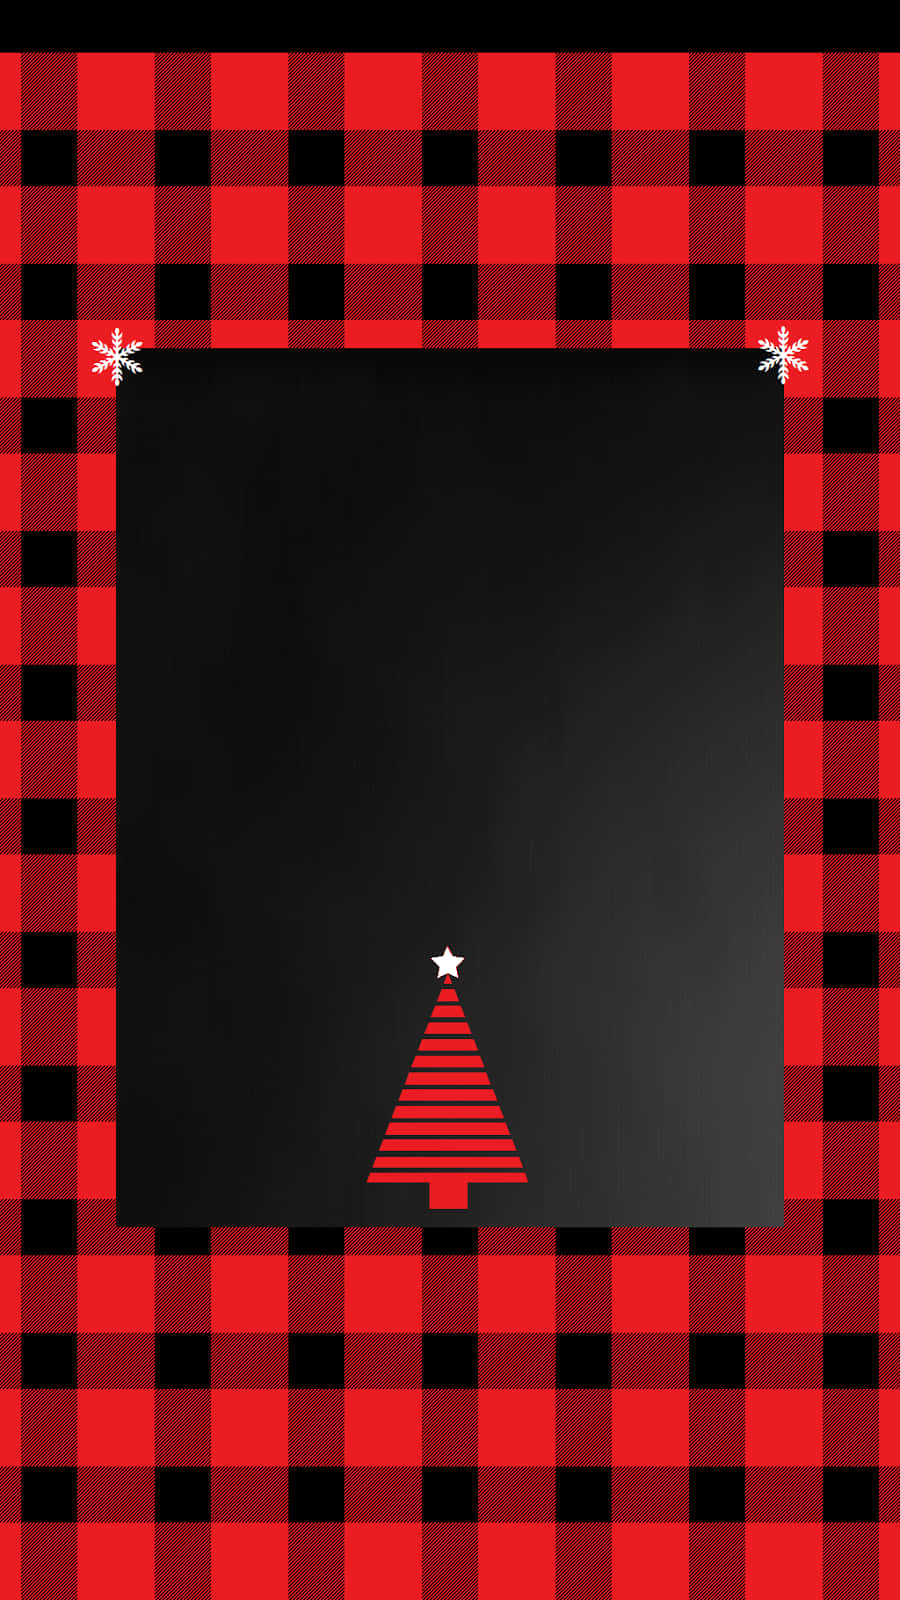 Rich and vibrant red plaid pattern.